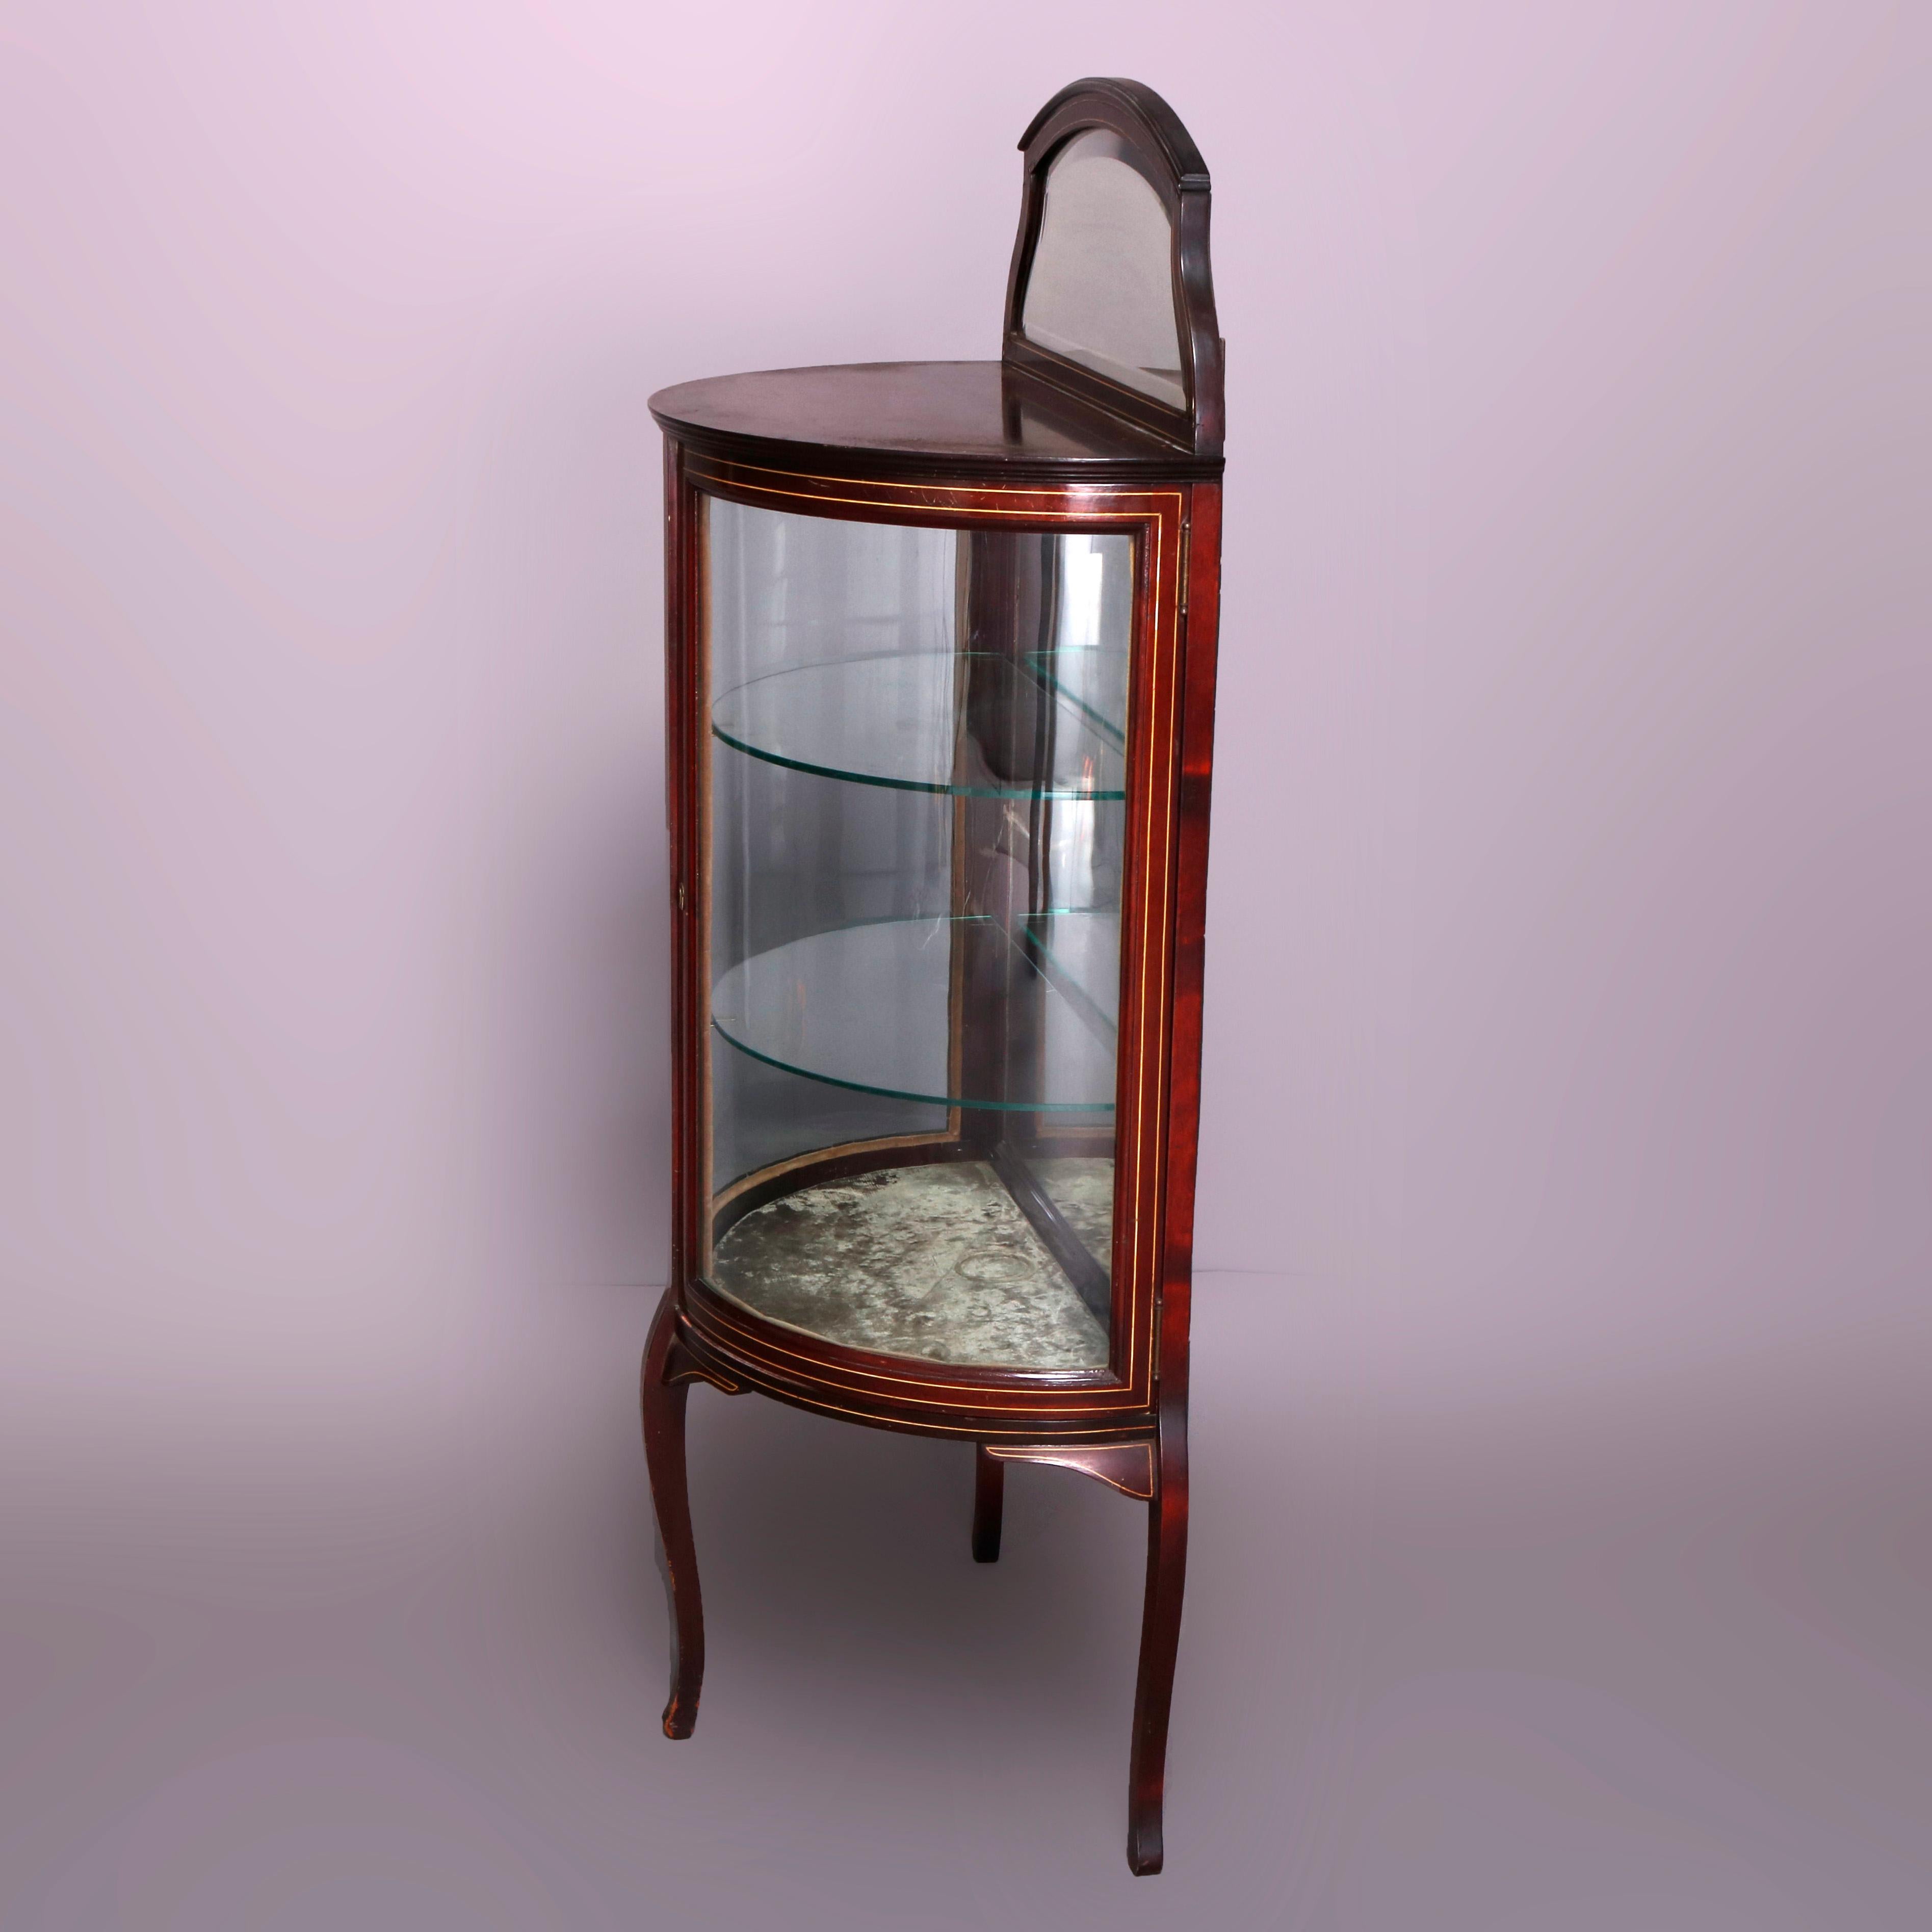 An antique French Louis XVI vitrine offers mahogany construction in demilune form having shaped and mirrored backsplash over single door cabinet with curved glass and mirrored interior, raised on cabriole legs, circa 1900.

Measures: 54.75